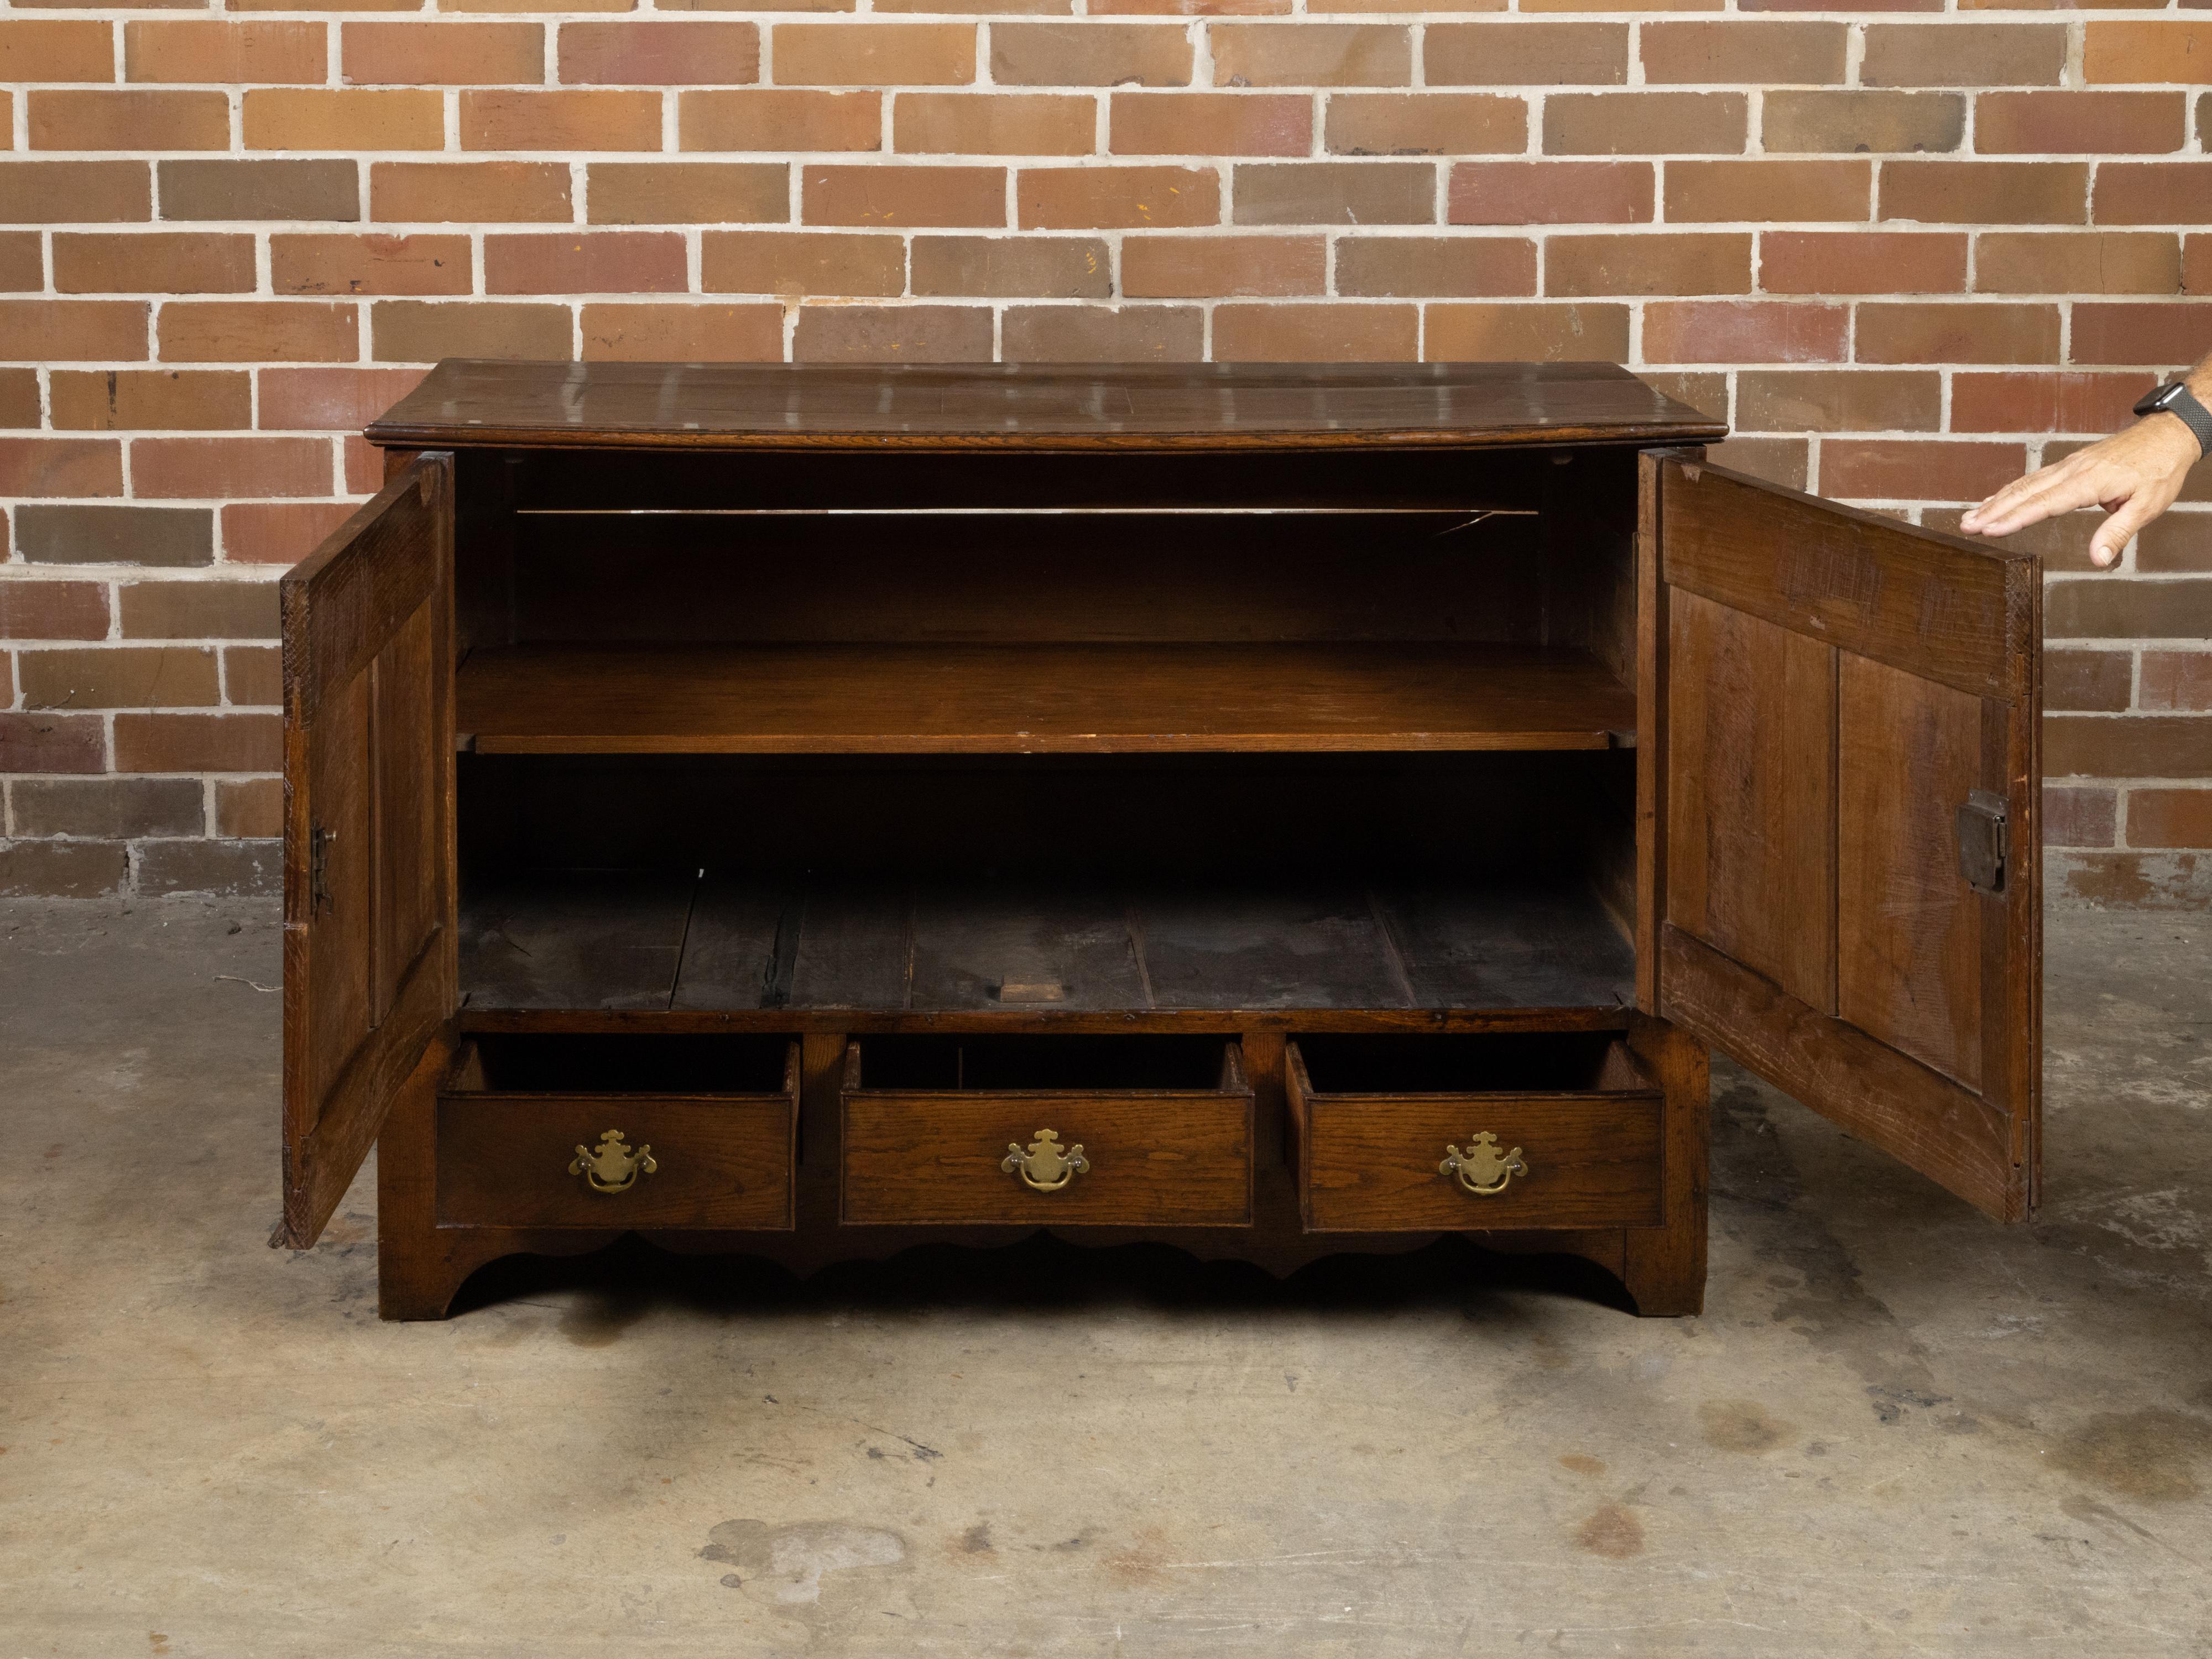 Small English Georgian Period 18th Century Oak Buffet with Carved Arching Motifs In Good Condition For Sale In Atlanta, GA